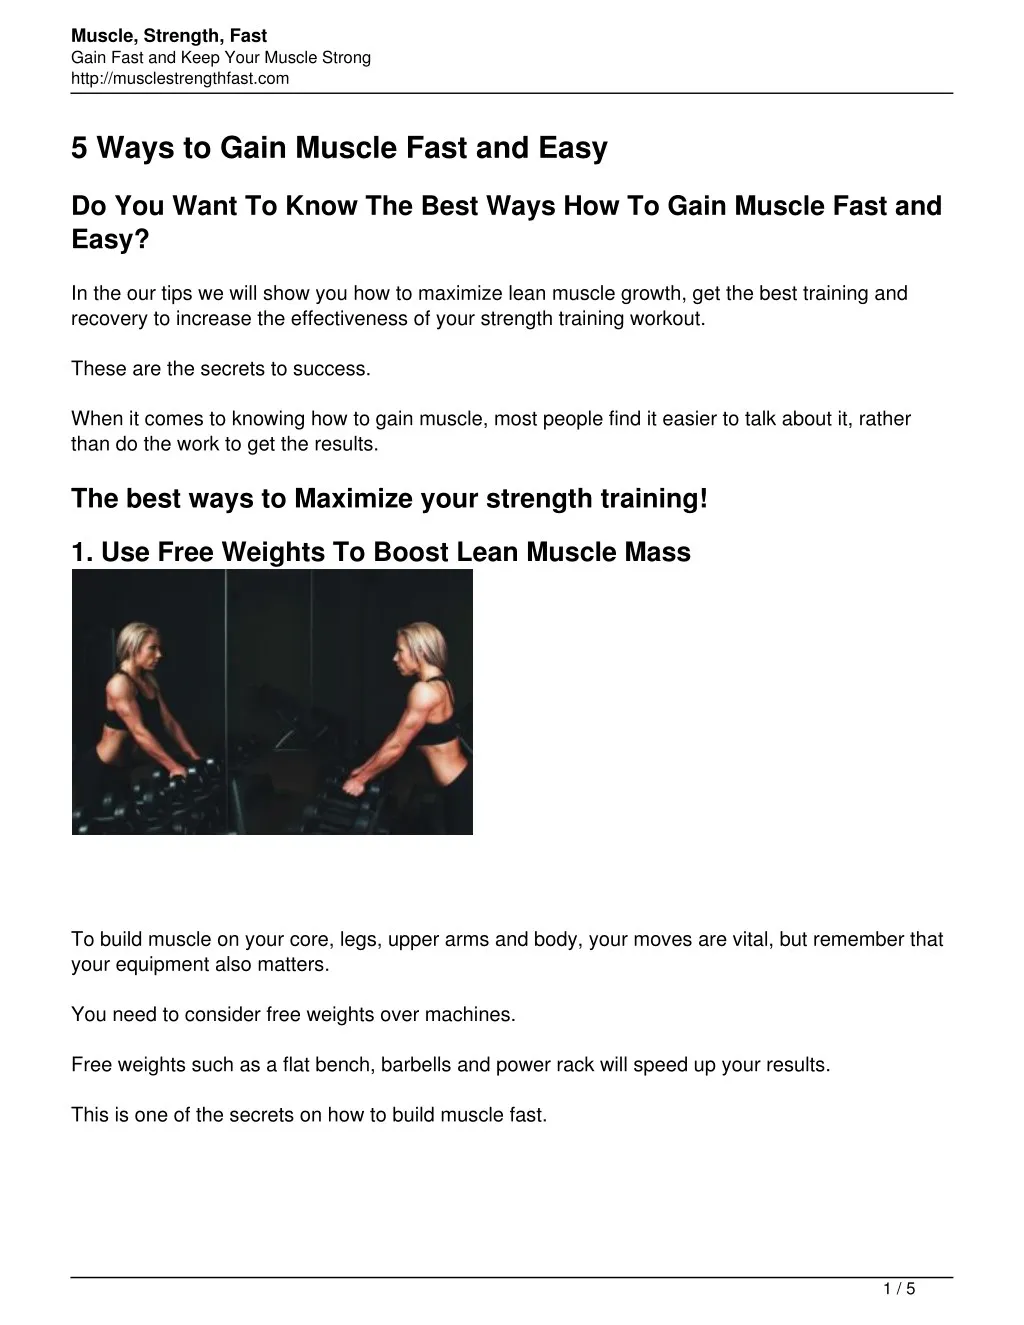 muscle strength fast gain fast and keep your